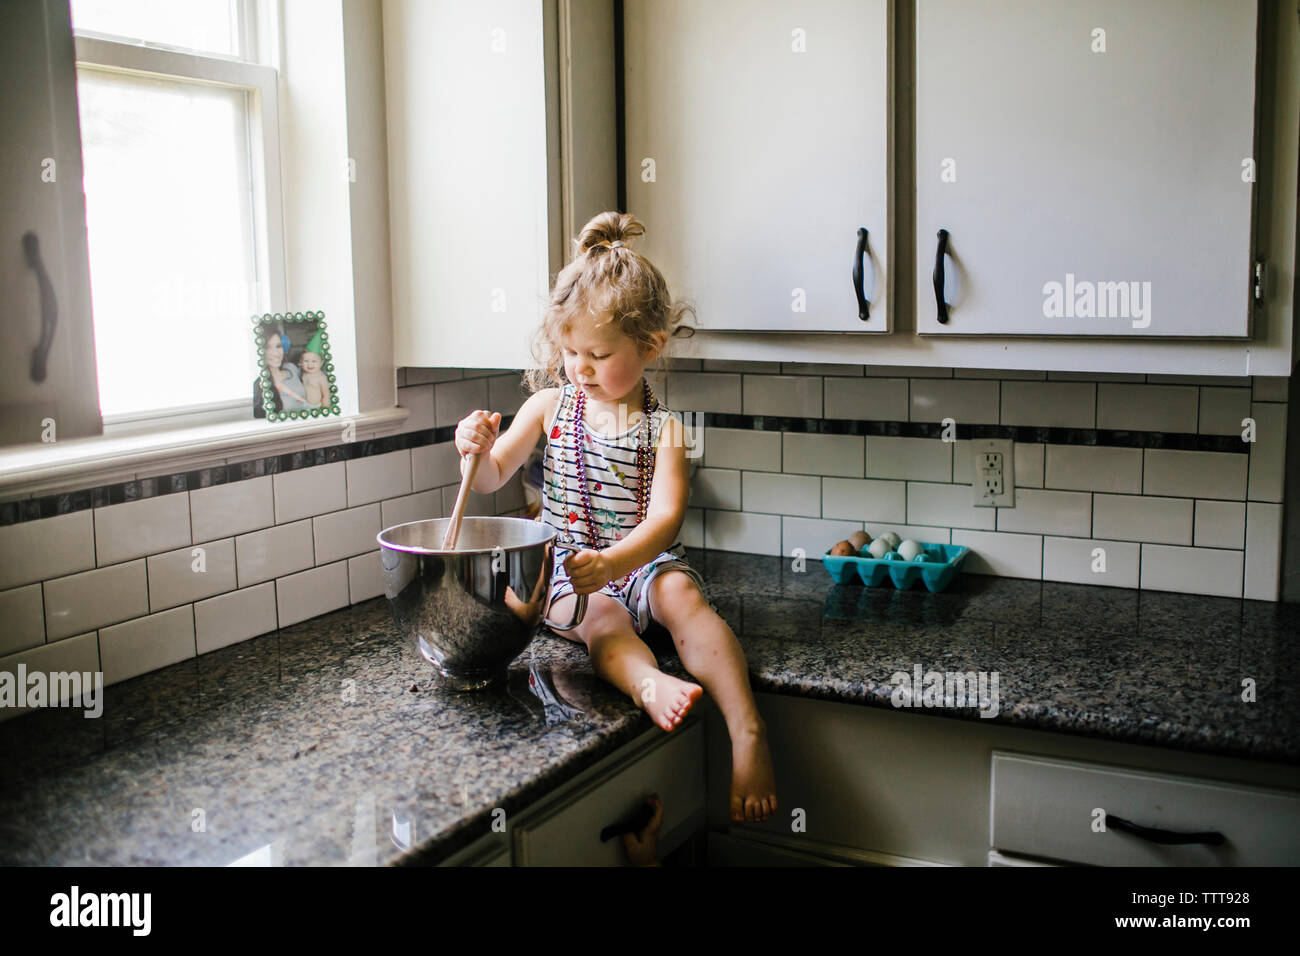 Girl preparing food in container while sitting on kitchen counter at home Stock Photo